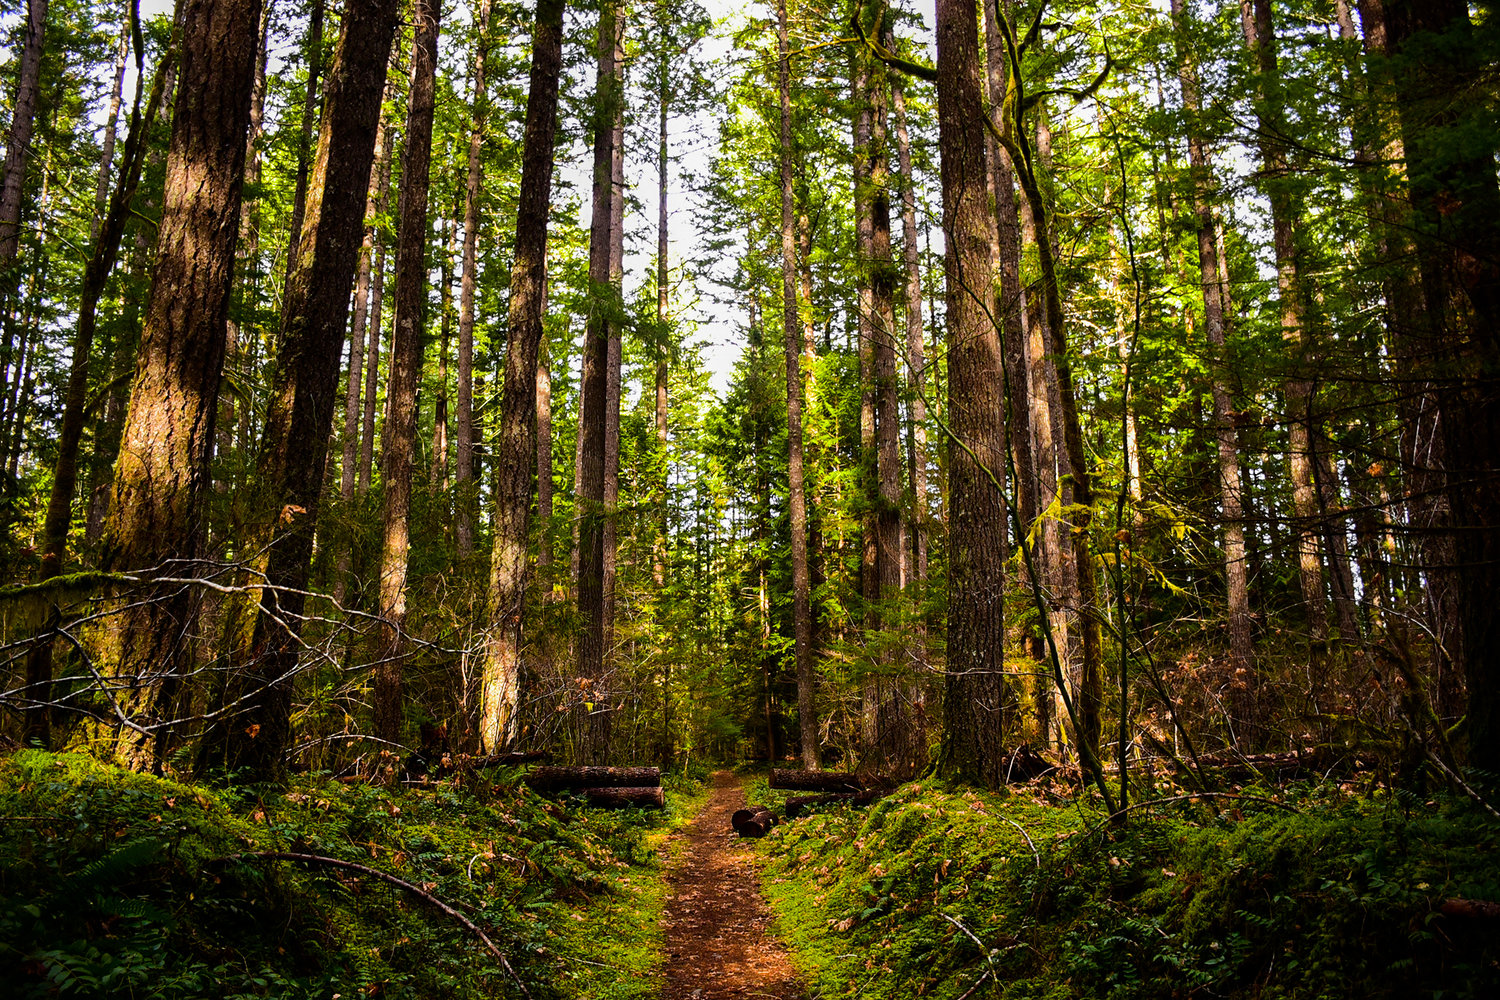 Washington State Parks owns 175 acres of forest in Packwood near the confluence of Skate Creek and the Cowlitz River.